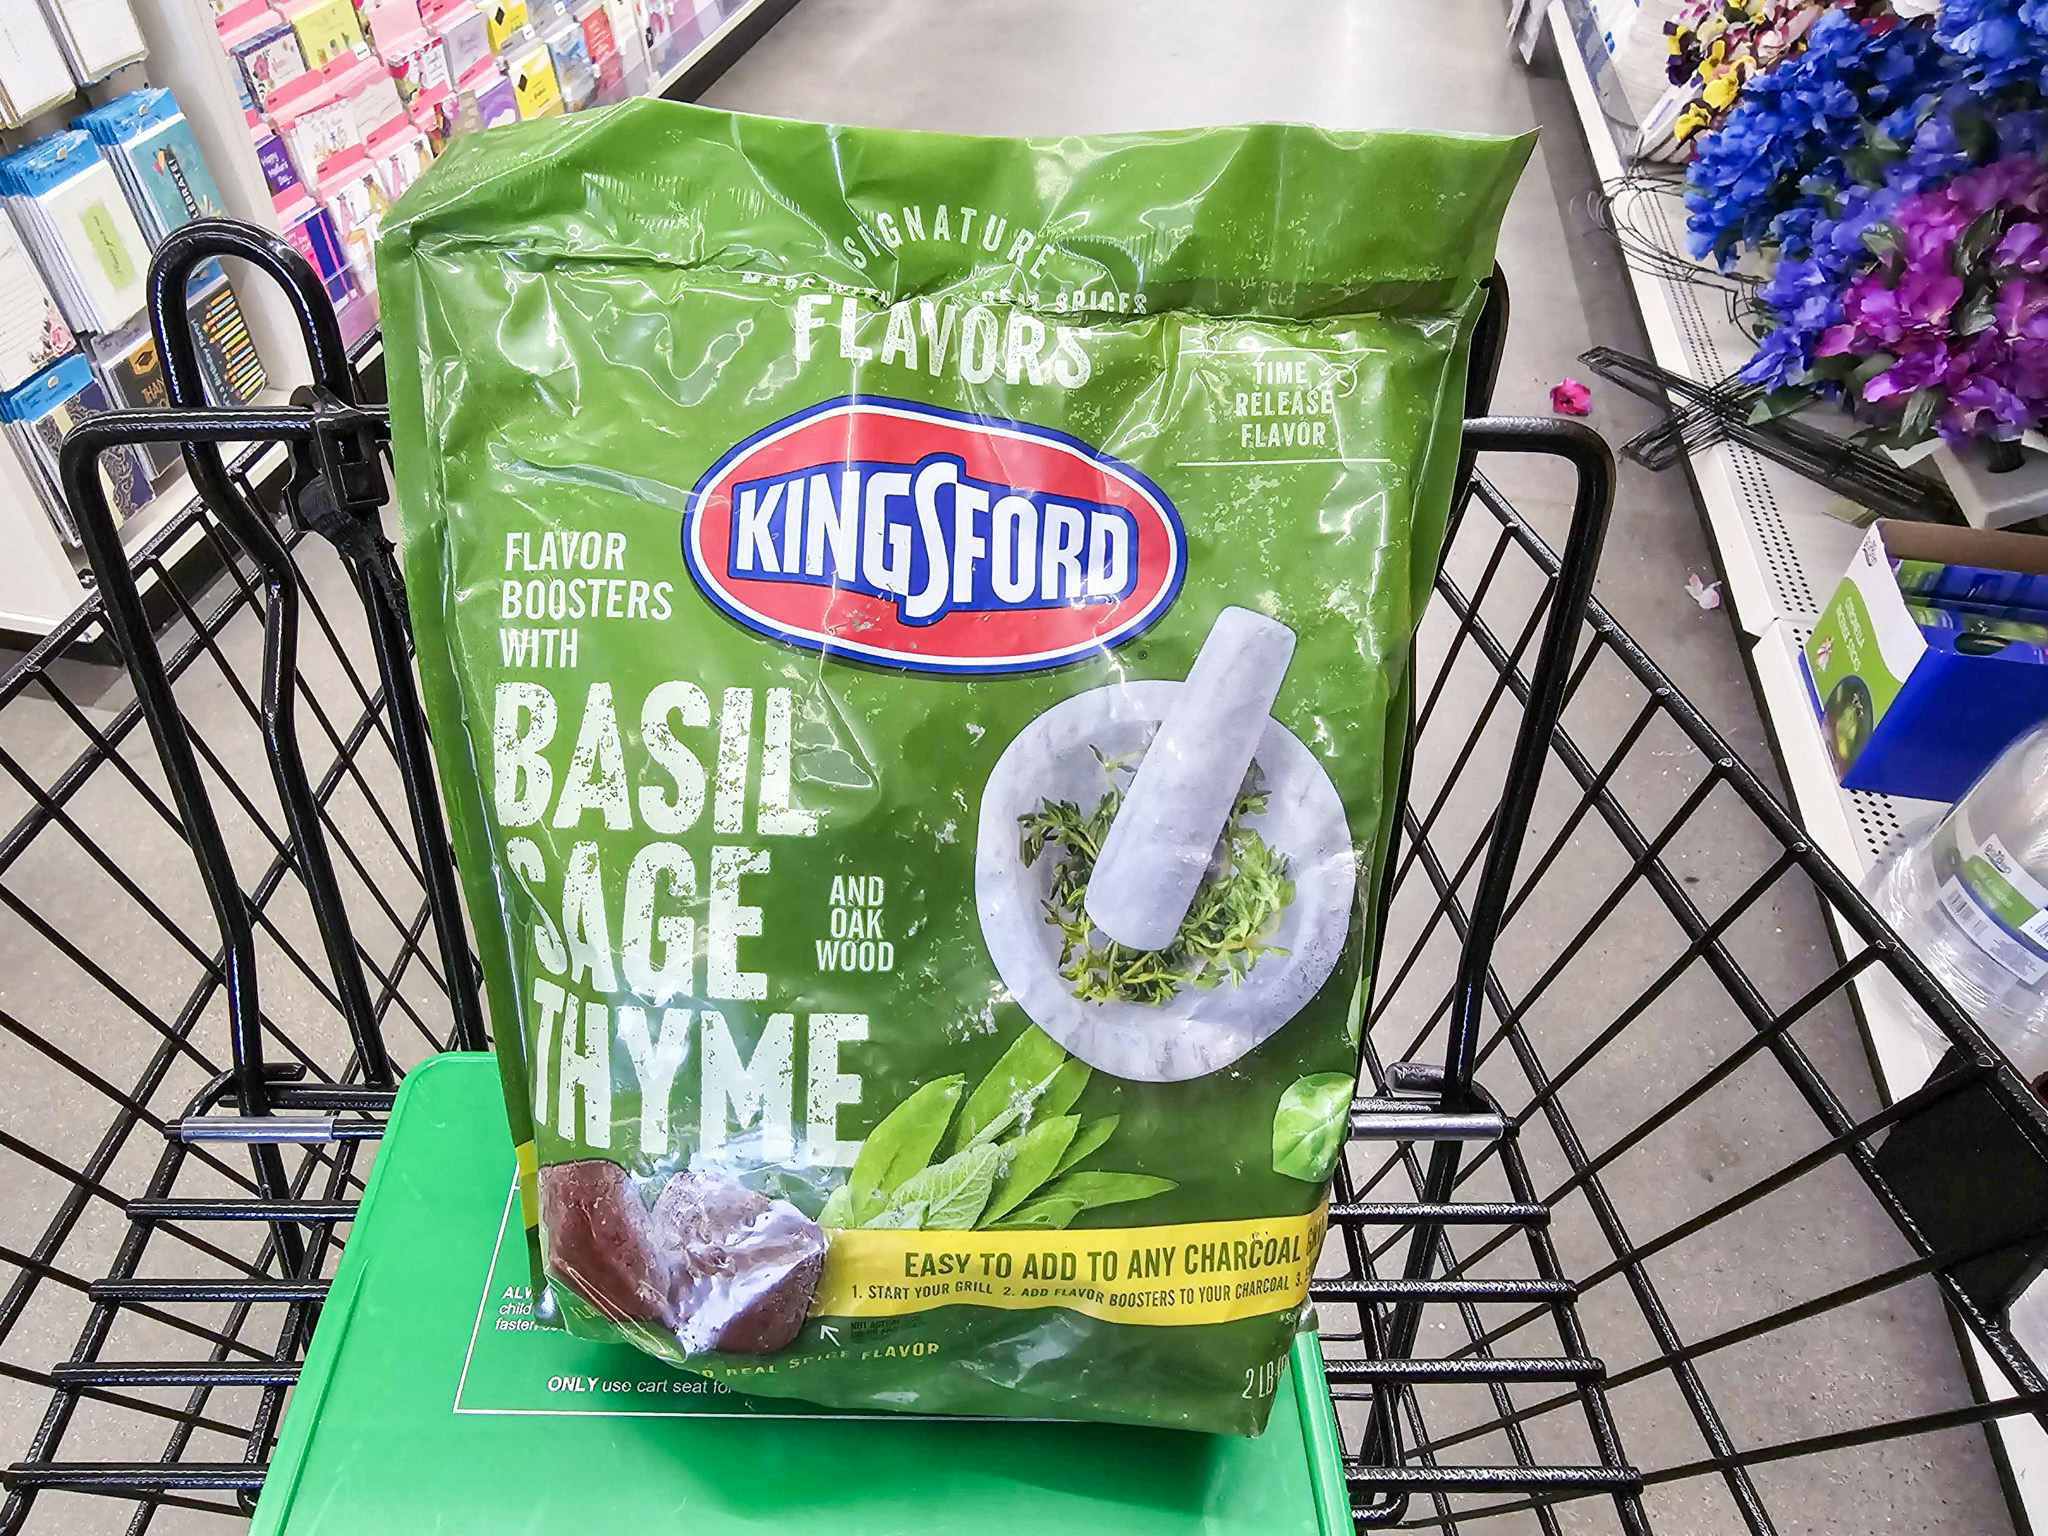 Kingsford Flavor Booster Charcoal Briquettes, Only $1.25 at Dollar Tree